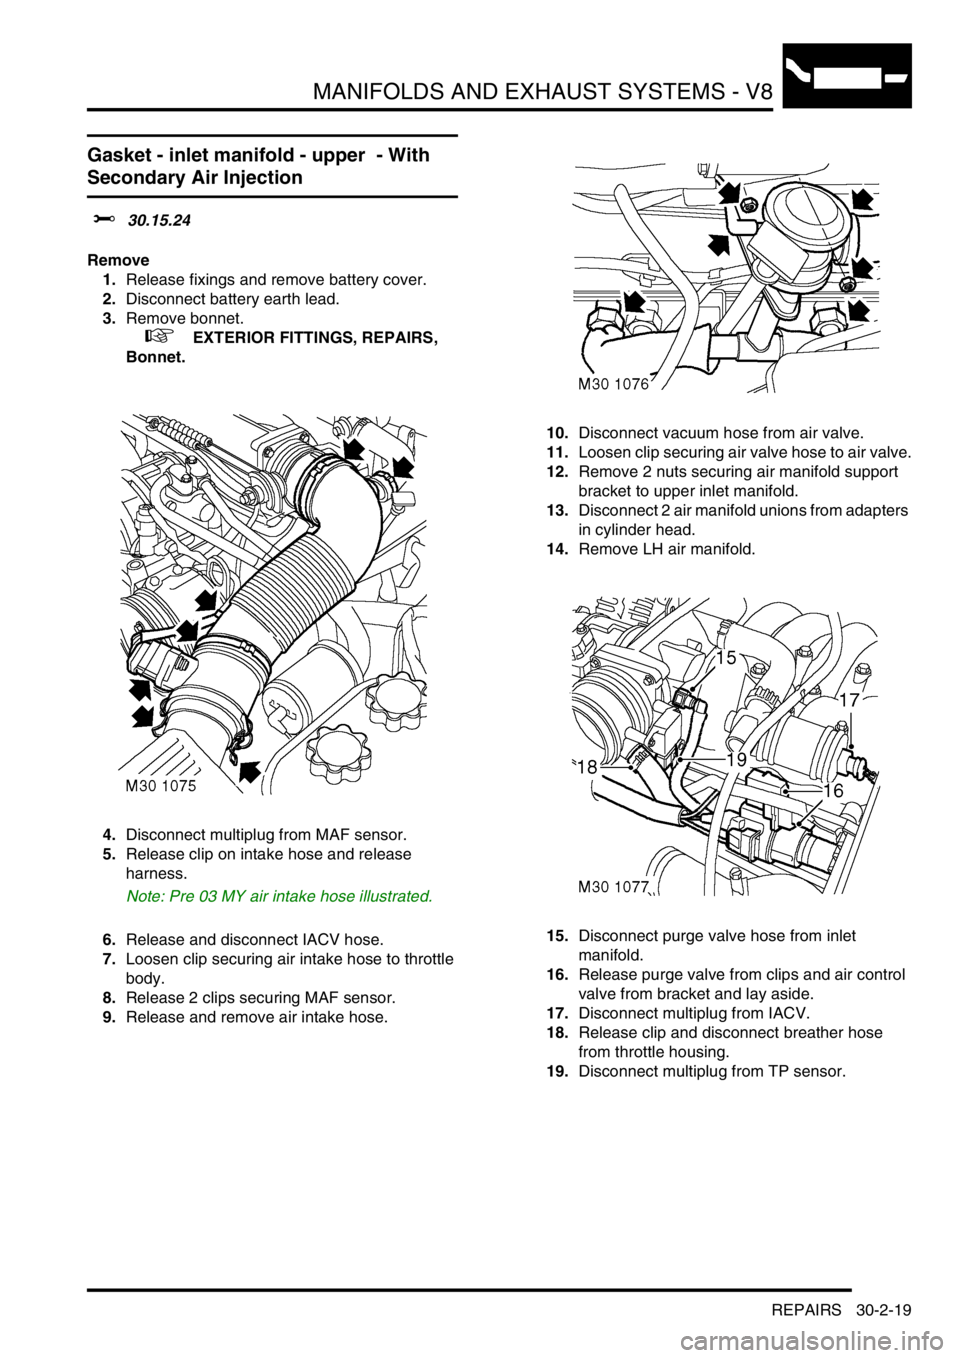 LAND ROVER DISCOVERY 2002 Owners Manual MANIFOLDS AND EXHAUST SYSTEMS - V8
REPAIRS 30-2-19
Gasket - inlet manifold - upper  - With 
Secondary Air Injection 
$% 30.15.24
Remove
1.Release fixings and remove battery cover. 
2.Disconnect batter